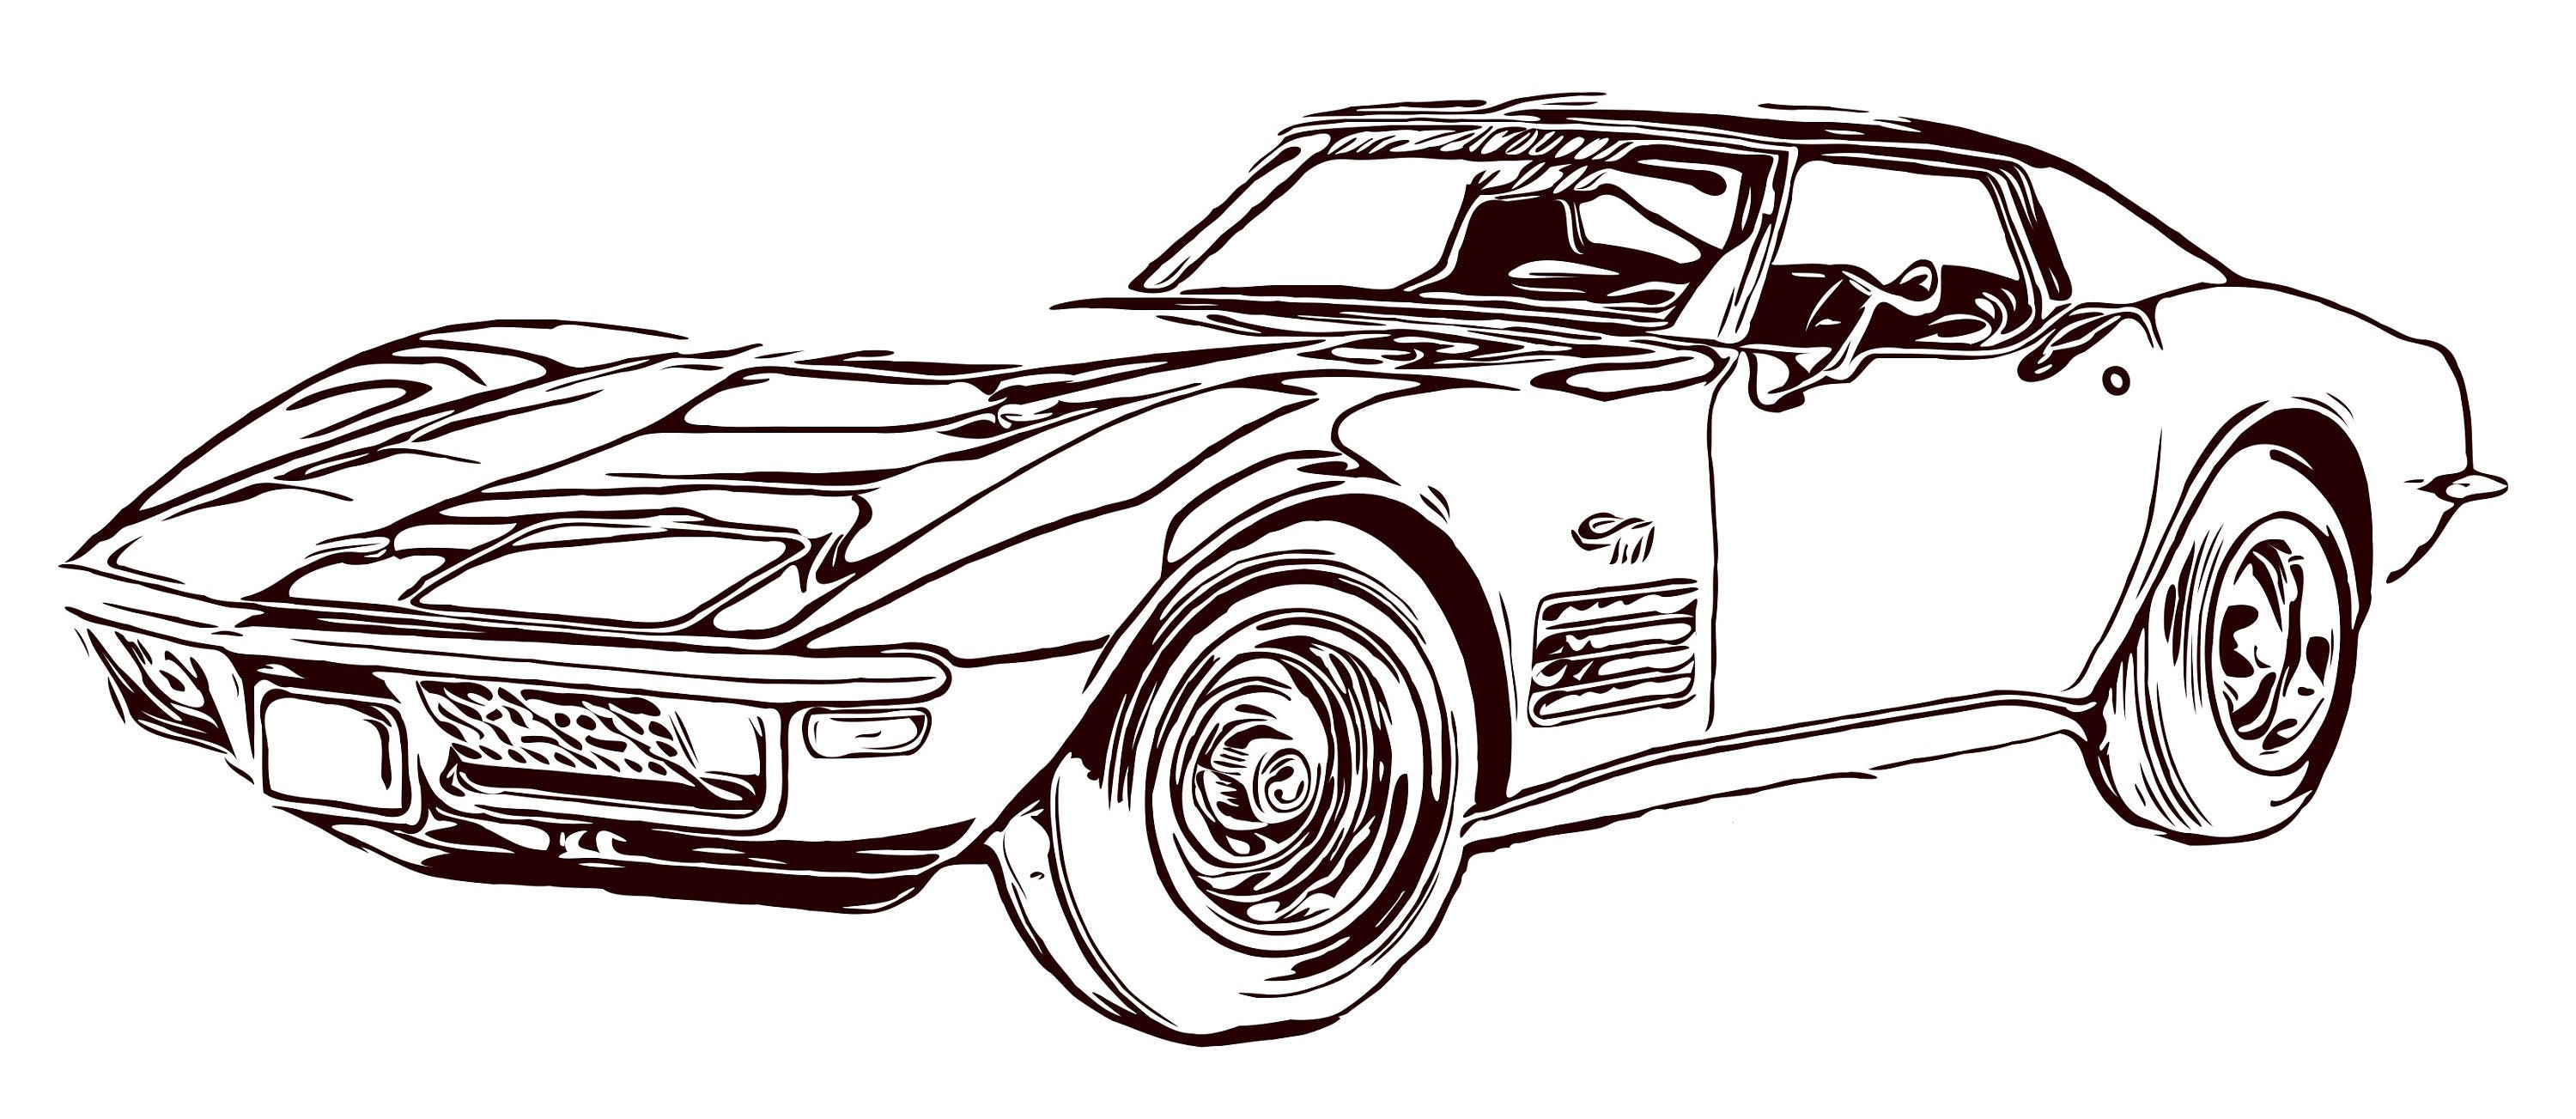 Download 1971 Chevy Corvette svg dxf eps png vector file for ...